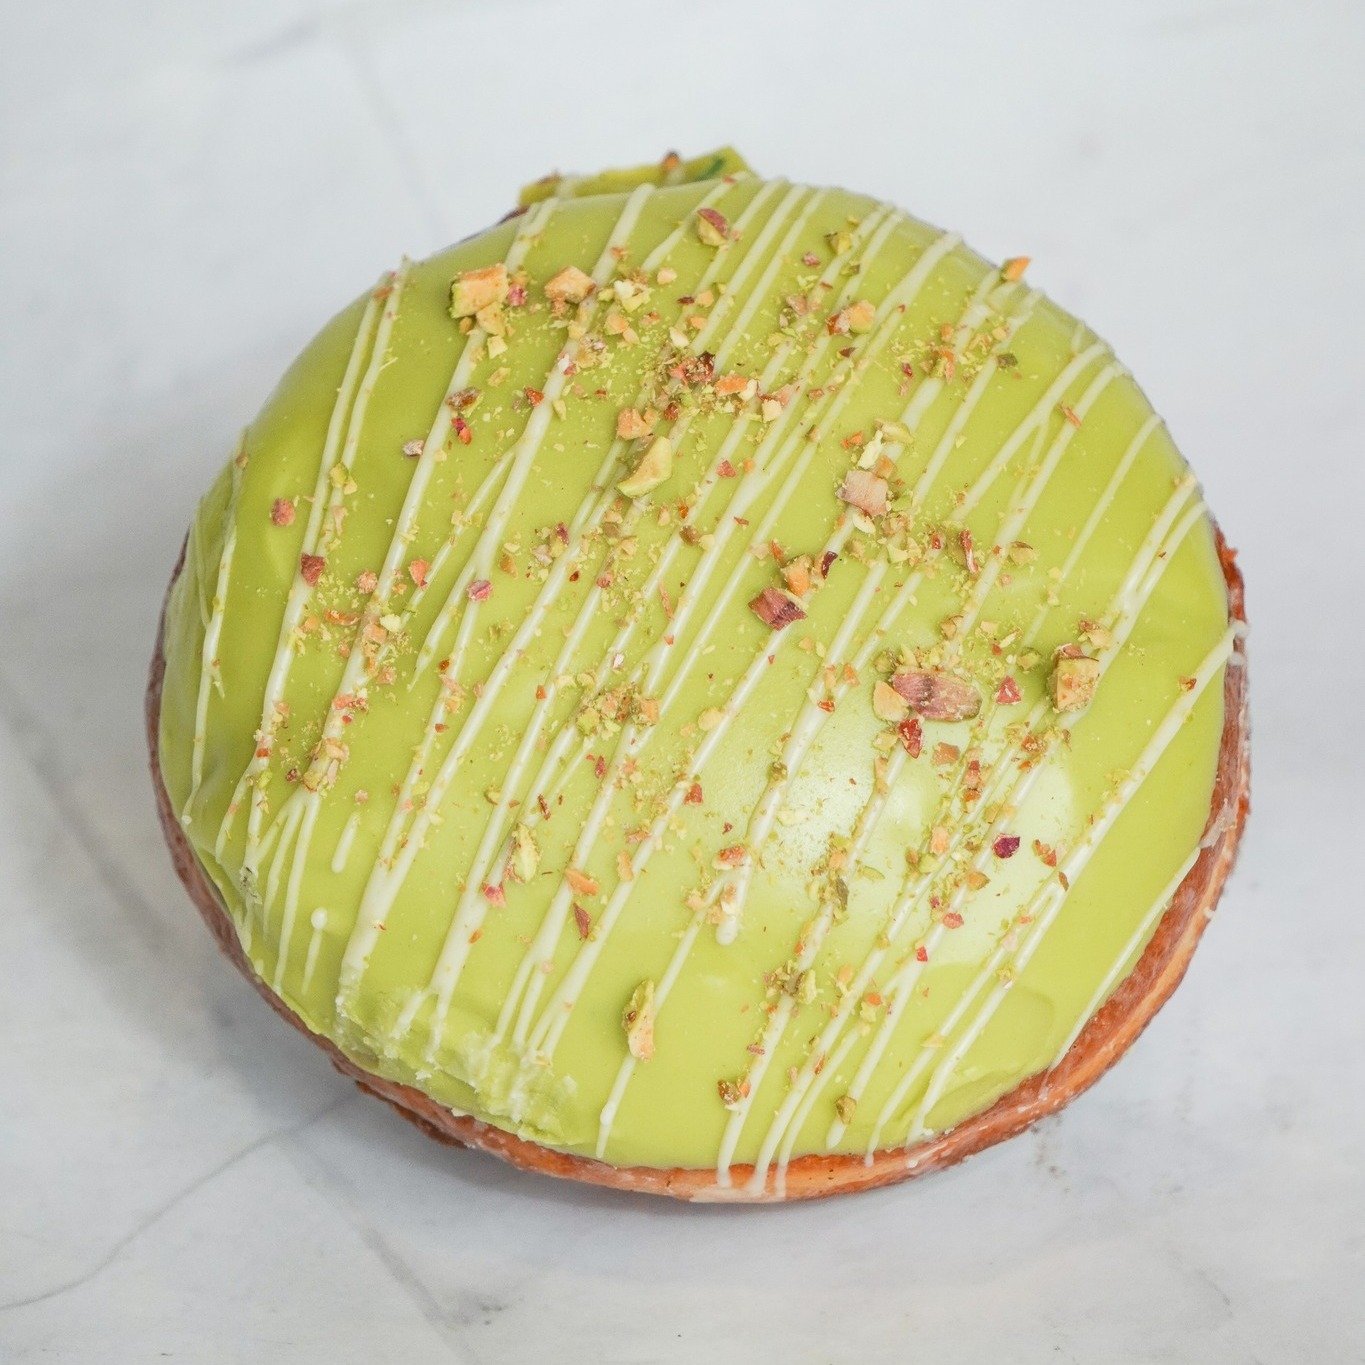 Our Pistachio Latte doughnut is only available for a few more days! 

Don't miss out and preorder yours online. www.ilovesainthonore.com 💚 

📍9460 W Flamingo Rd, #115 &bull; ☎️: (702) 840-3361
📍5020 Blue Diamond Rd, Suite A &bull; ☎️: (725) 258-33